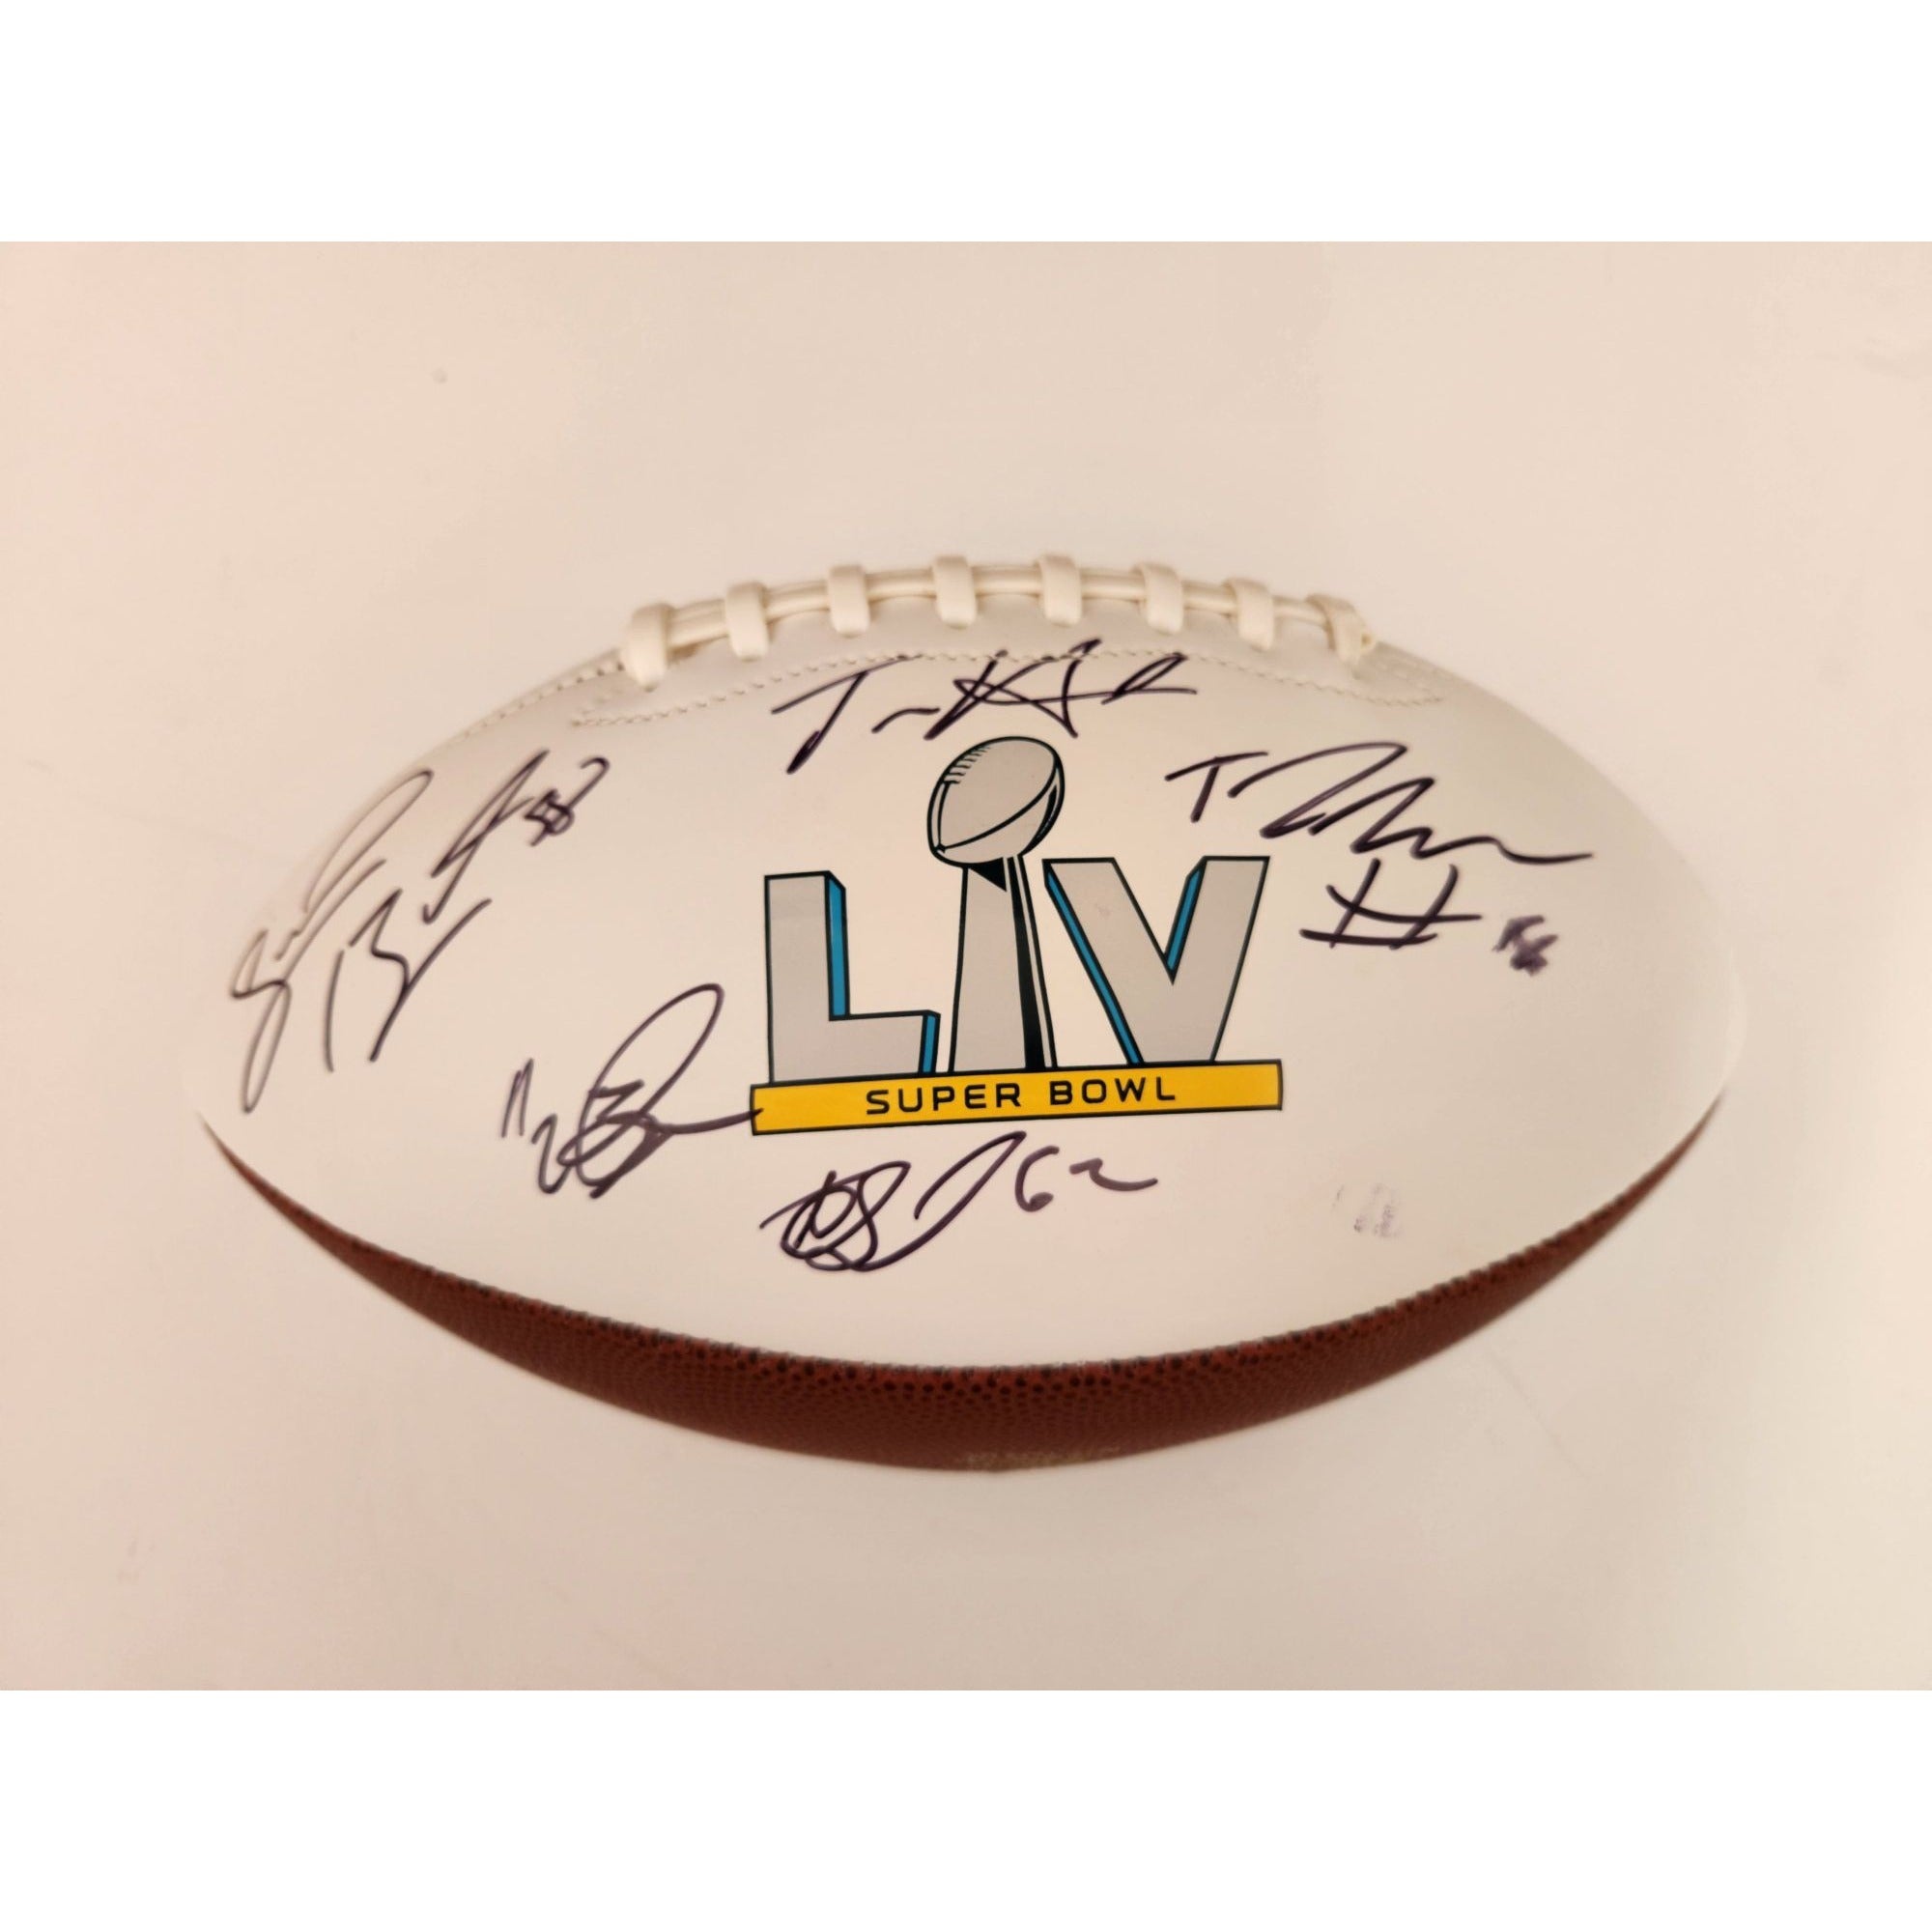 Tampa Bay Buccaneers Tom Brady Rob Gronkowski Super Bowl champions team sign football with proof